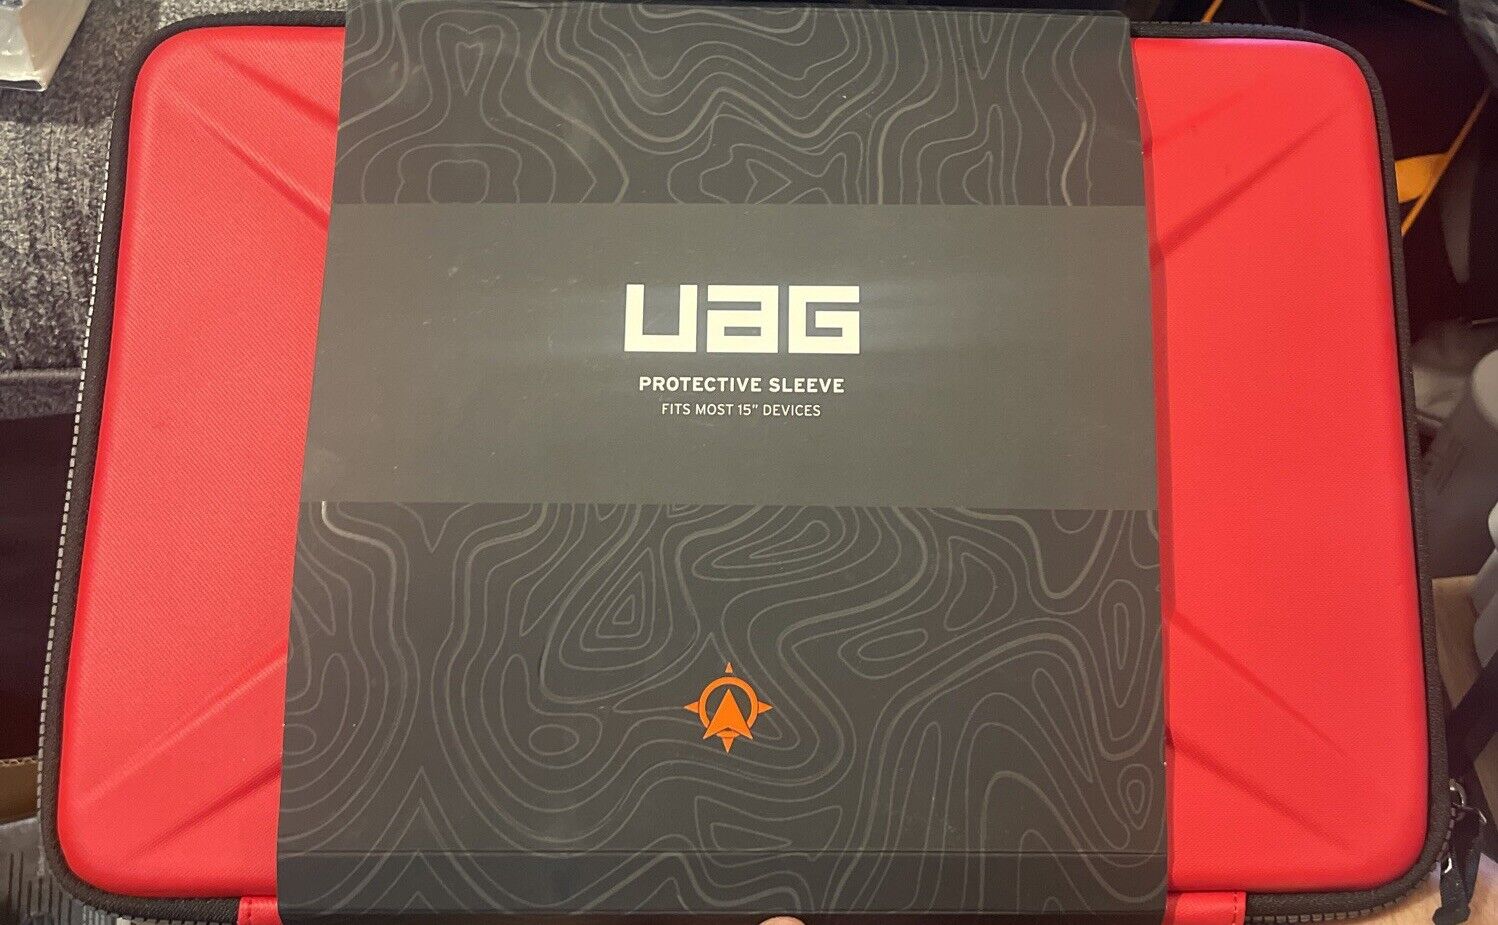 Urban Armour Gear UAG Large Red Protective Sleeve For 11-15” Devices NEW